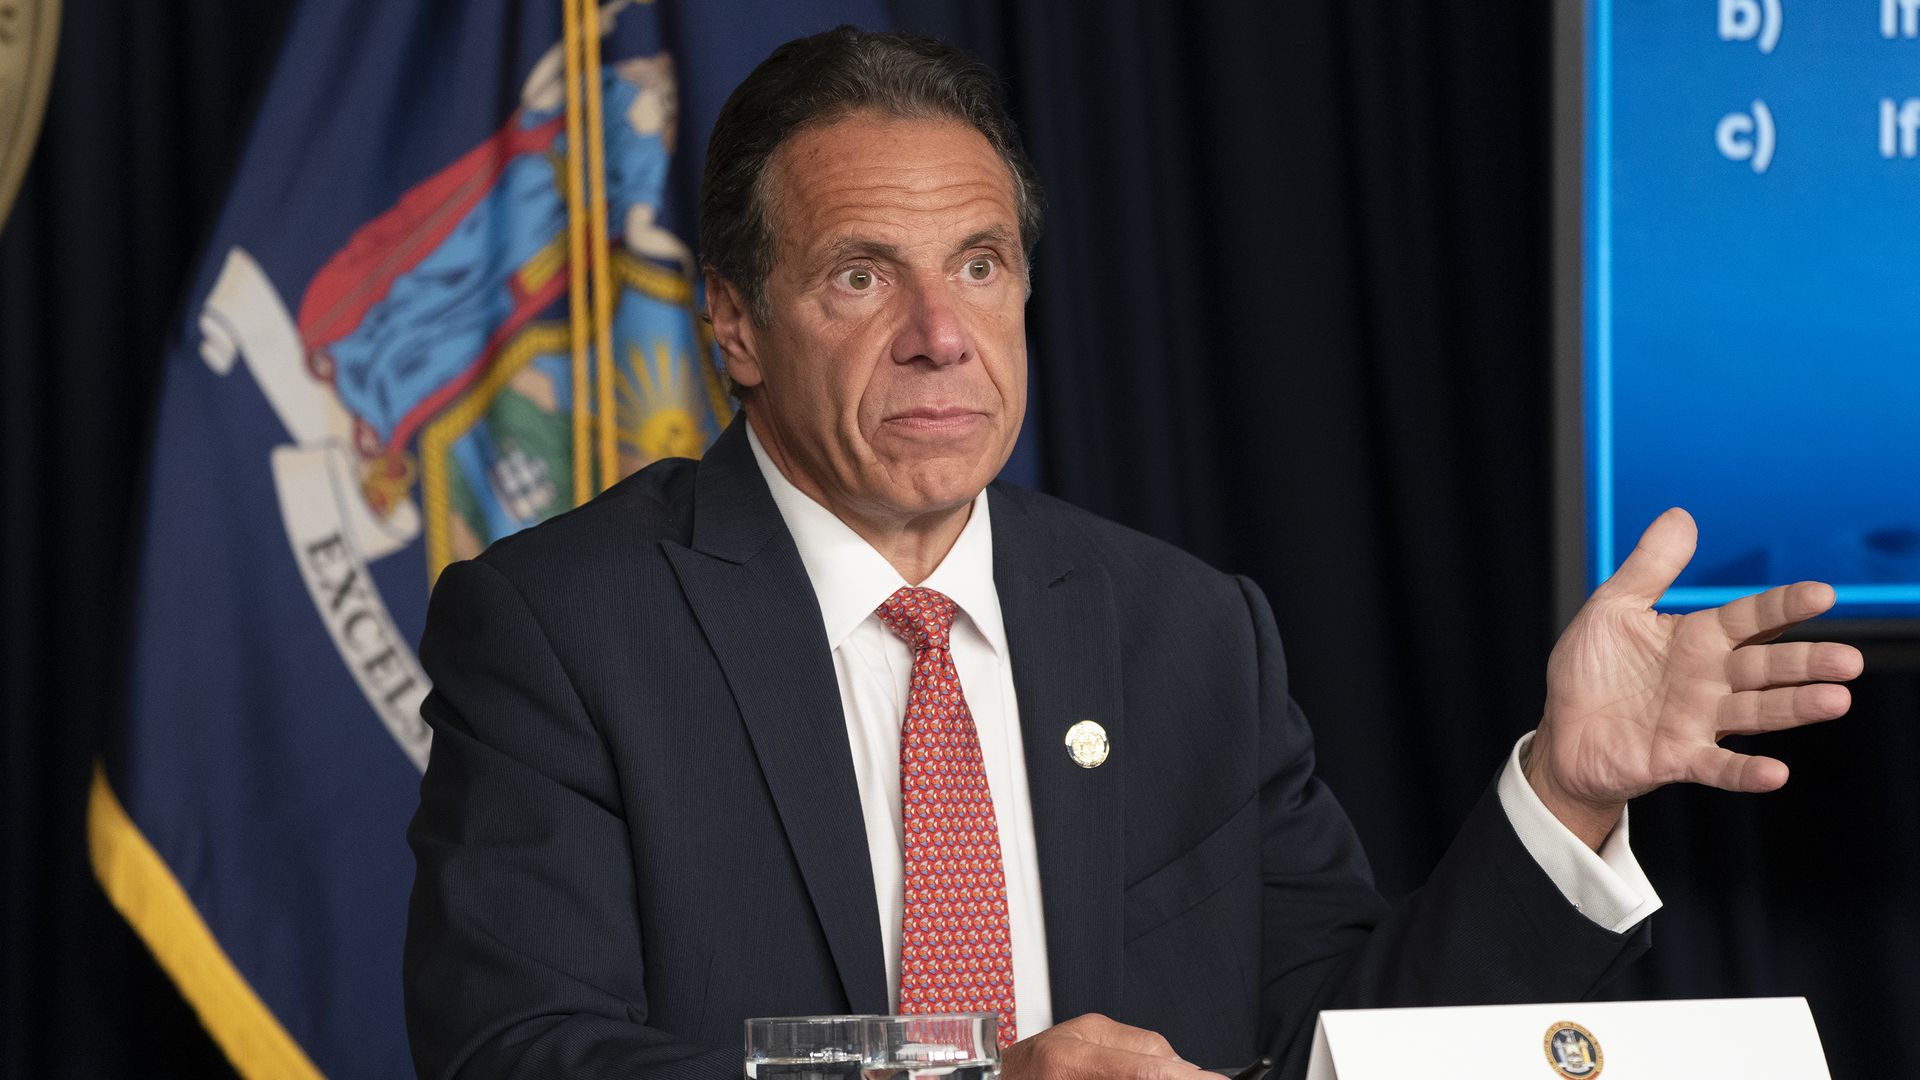 Gov. Cuomo during a press conference in New York City on Aug. 2.